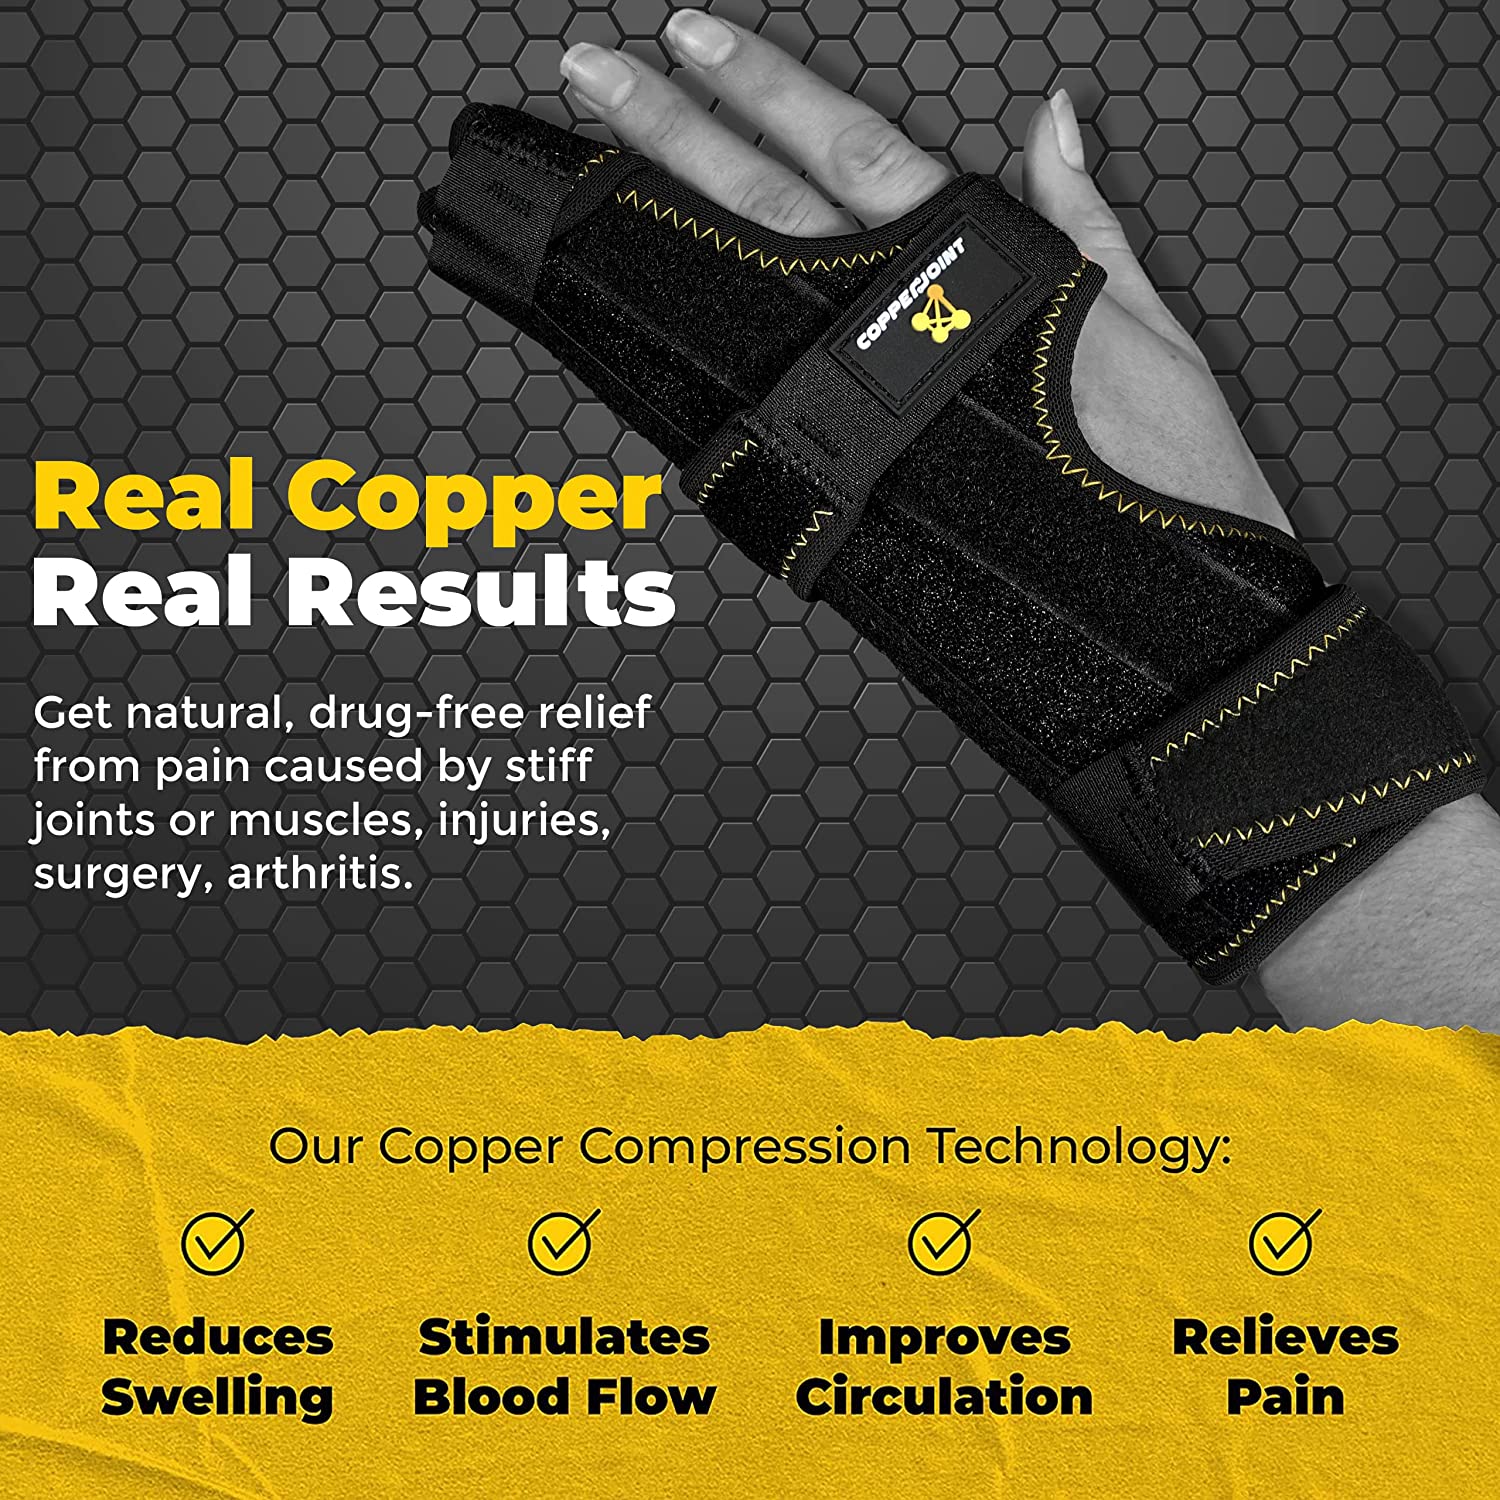 CopperJoint Offers Launch Discount on New Finger Brace